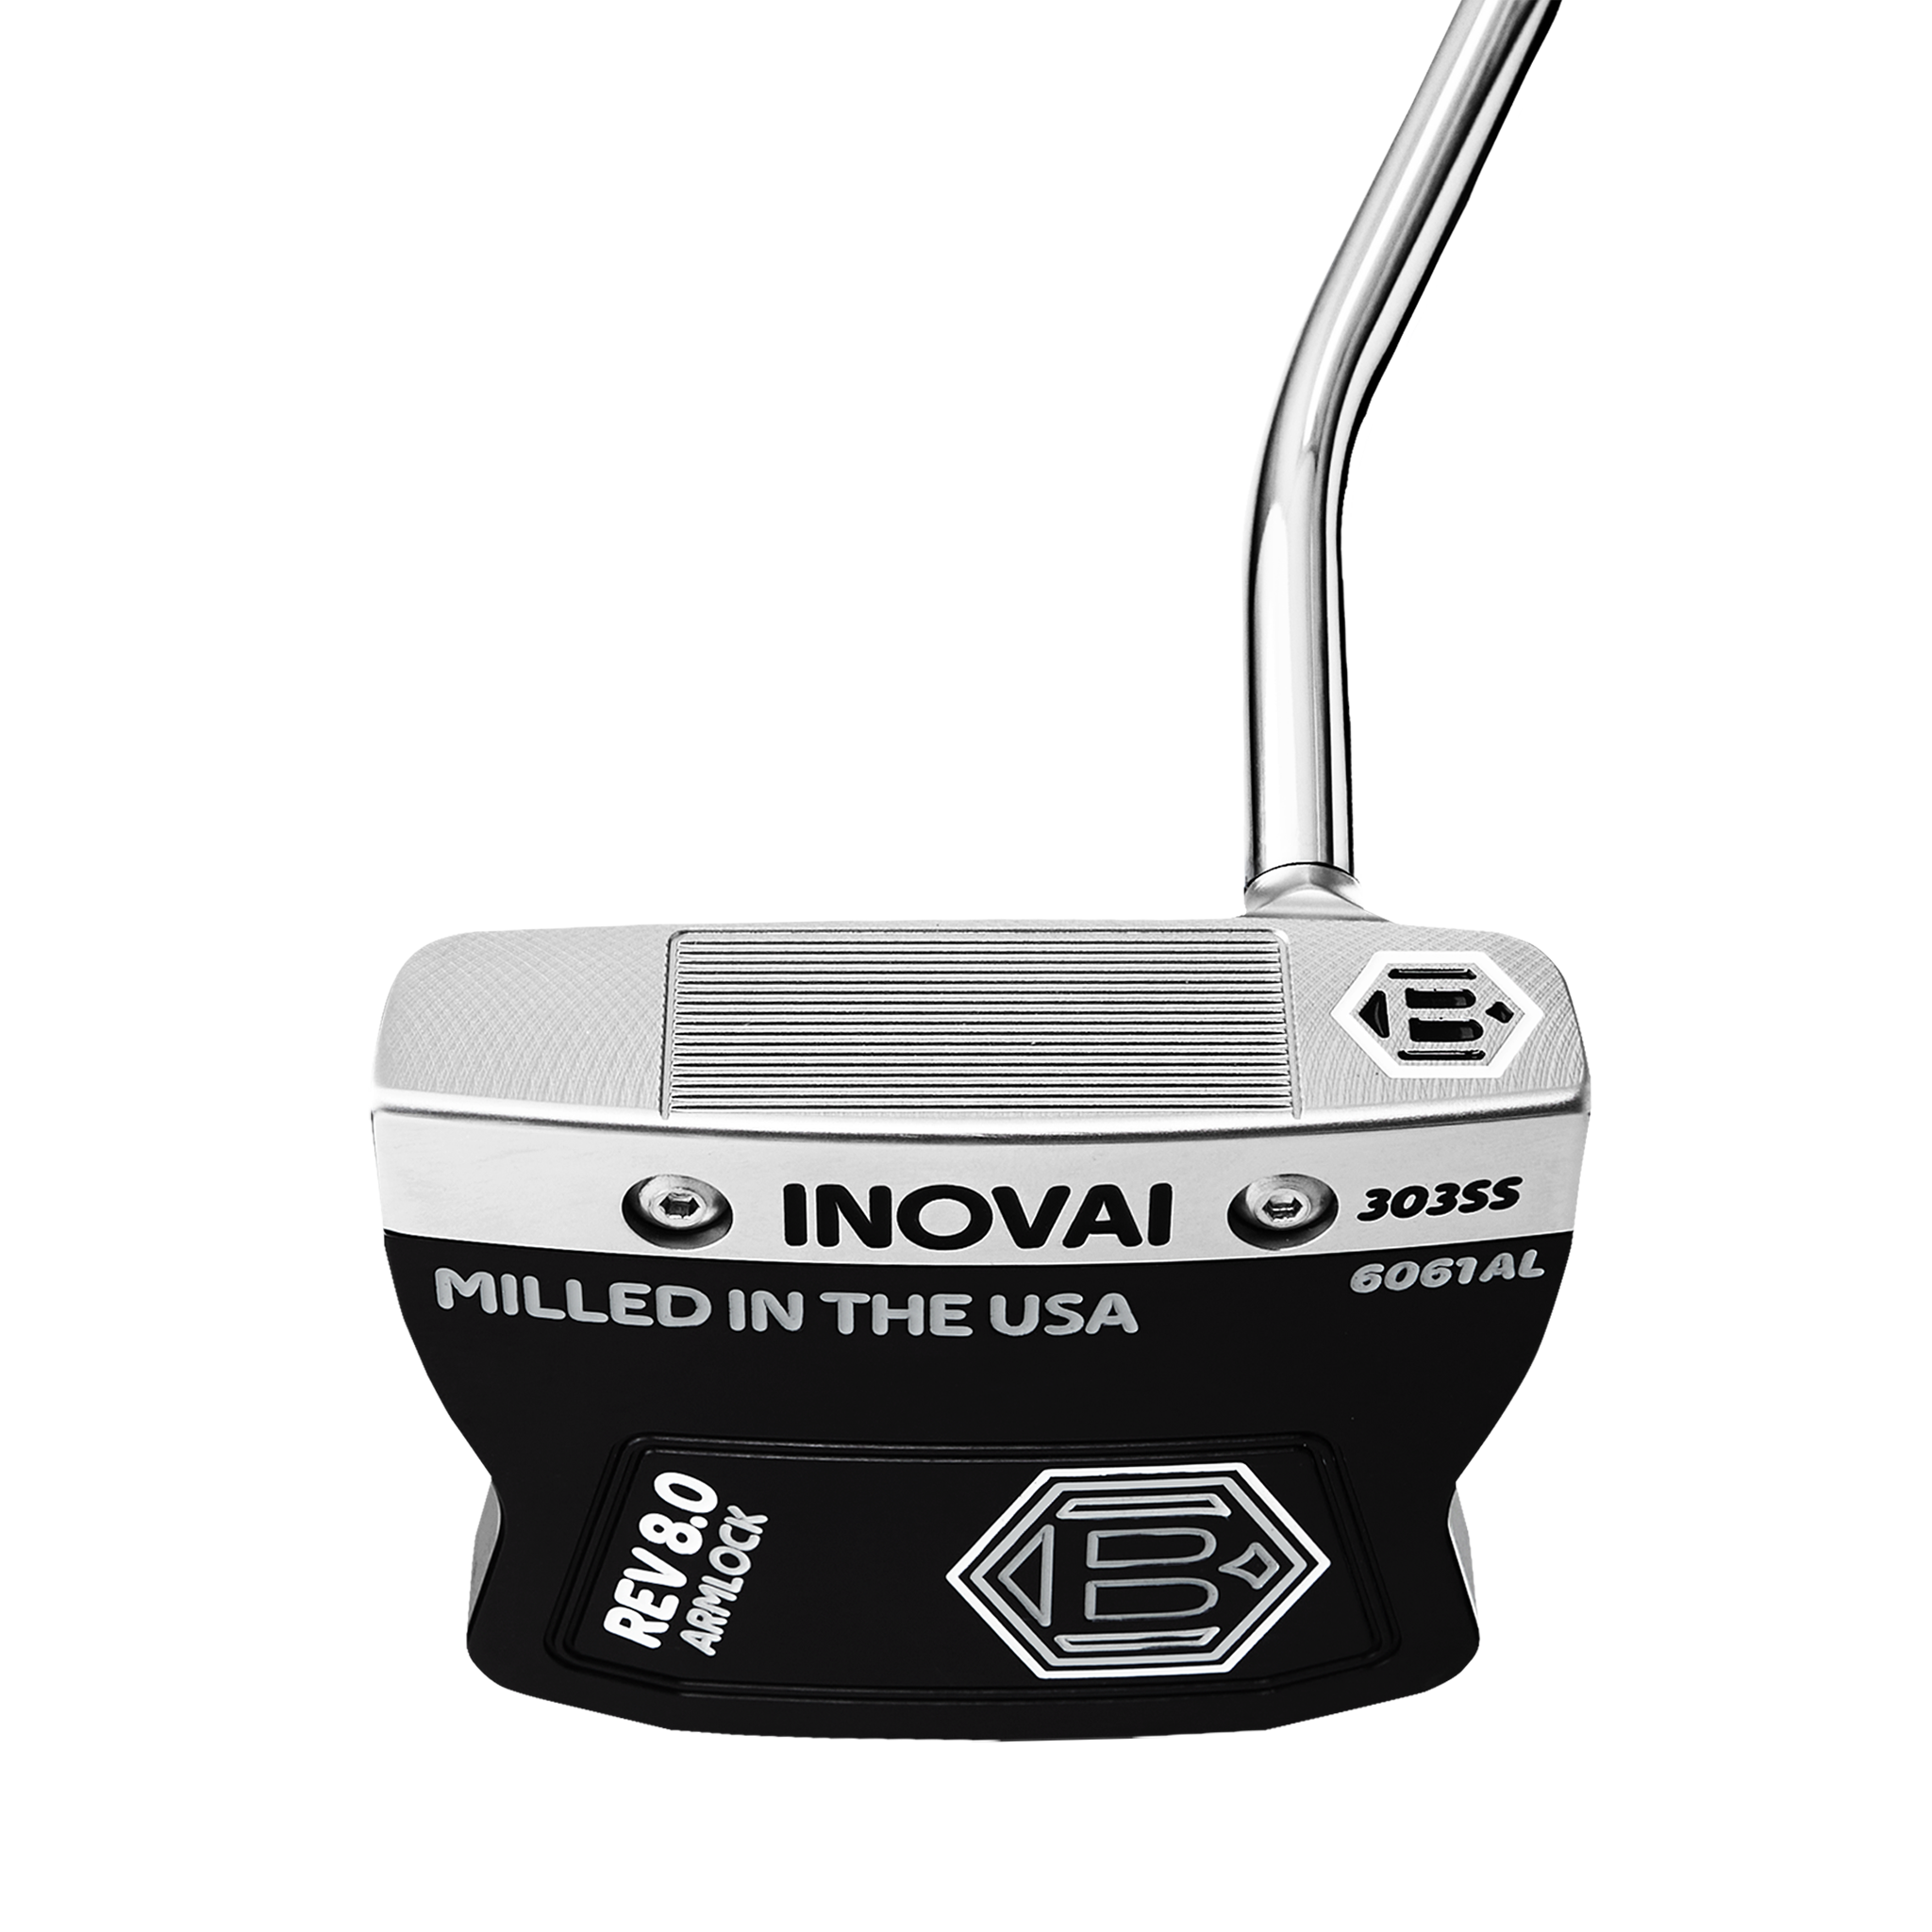 2022 INOVAI 8.0 Armlock Putter | Discover Yours Today! – Studio B